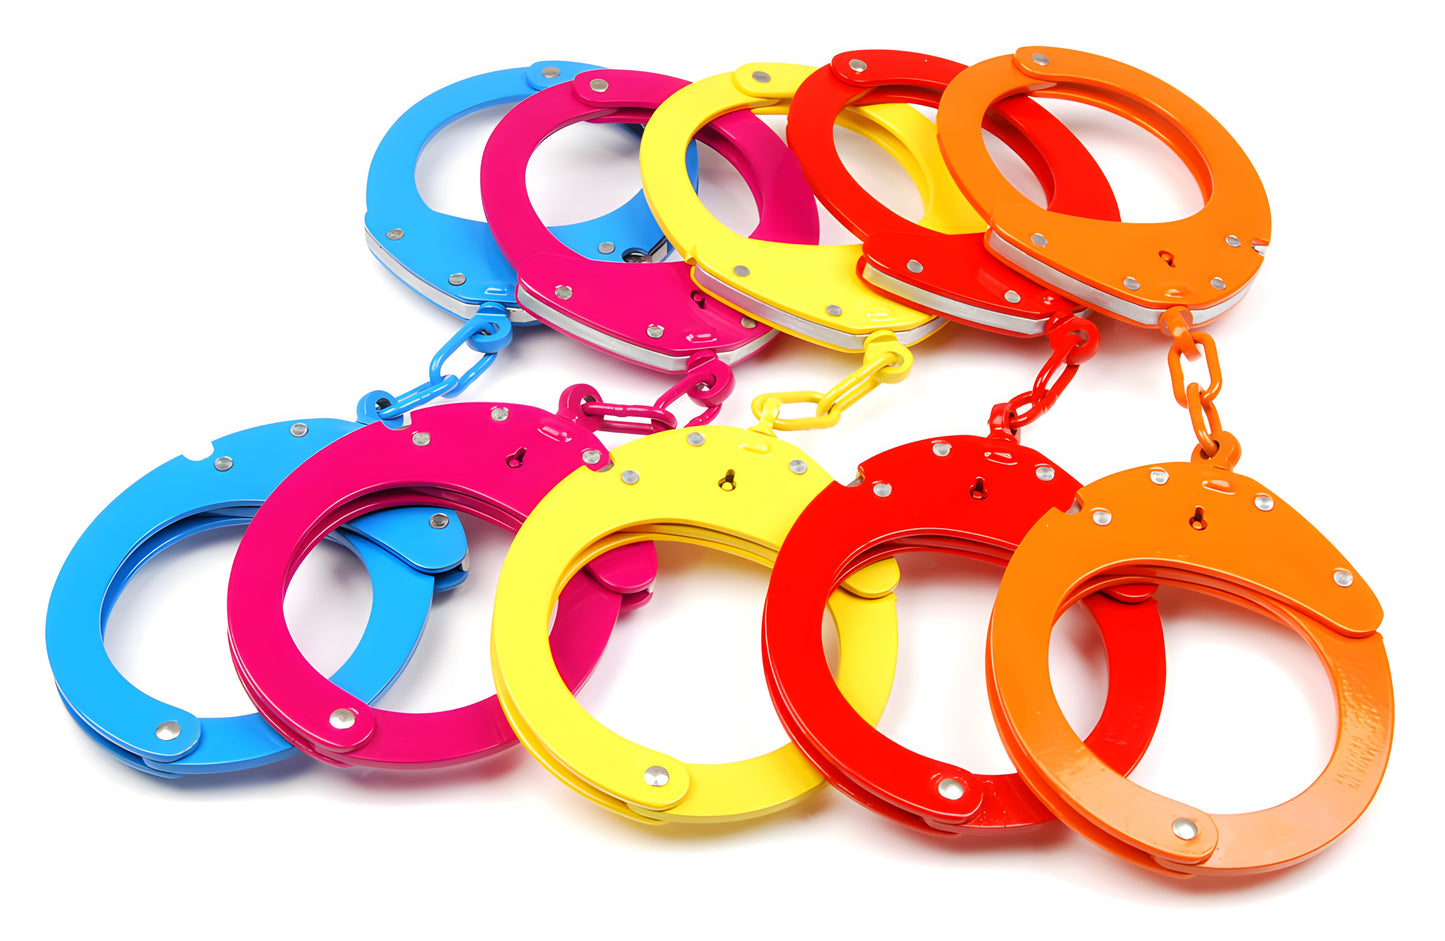 Handcuffs Clejuso Mod. 12A in multiple colors